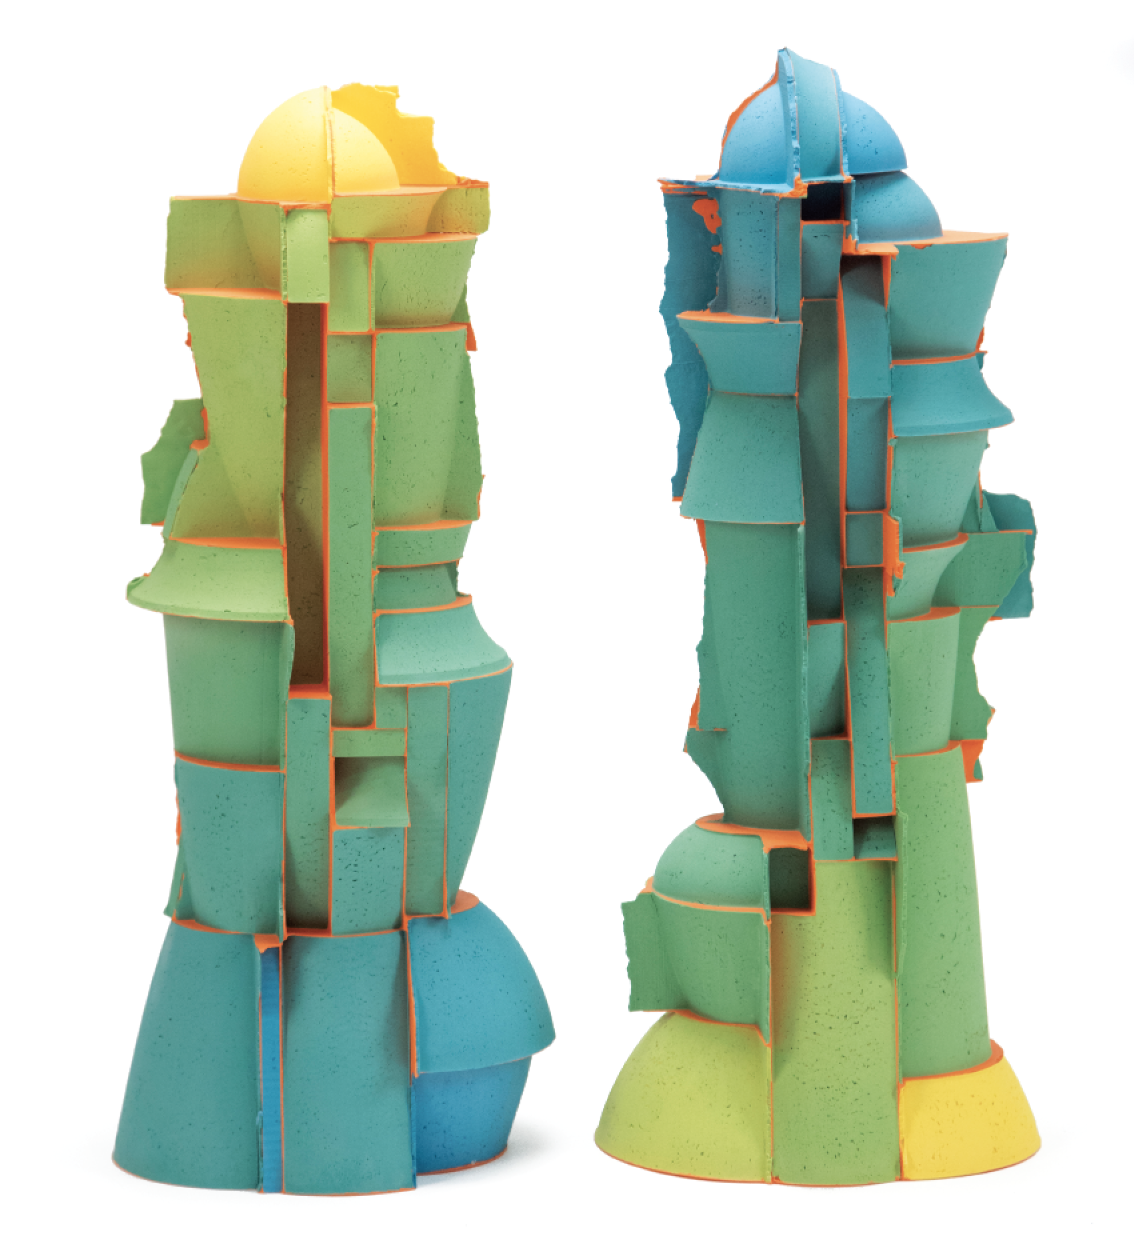 3 Kyle Johns’ Reverse Fade Structures, 25 in. (64 cm) in height, colored porcelain, fired to cone 6 in oxidation, 2021.